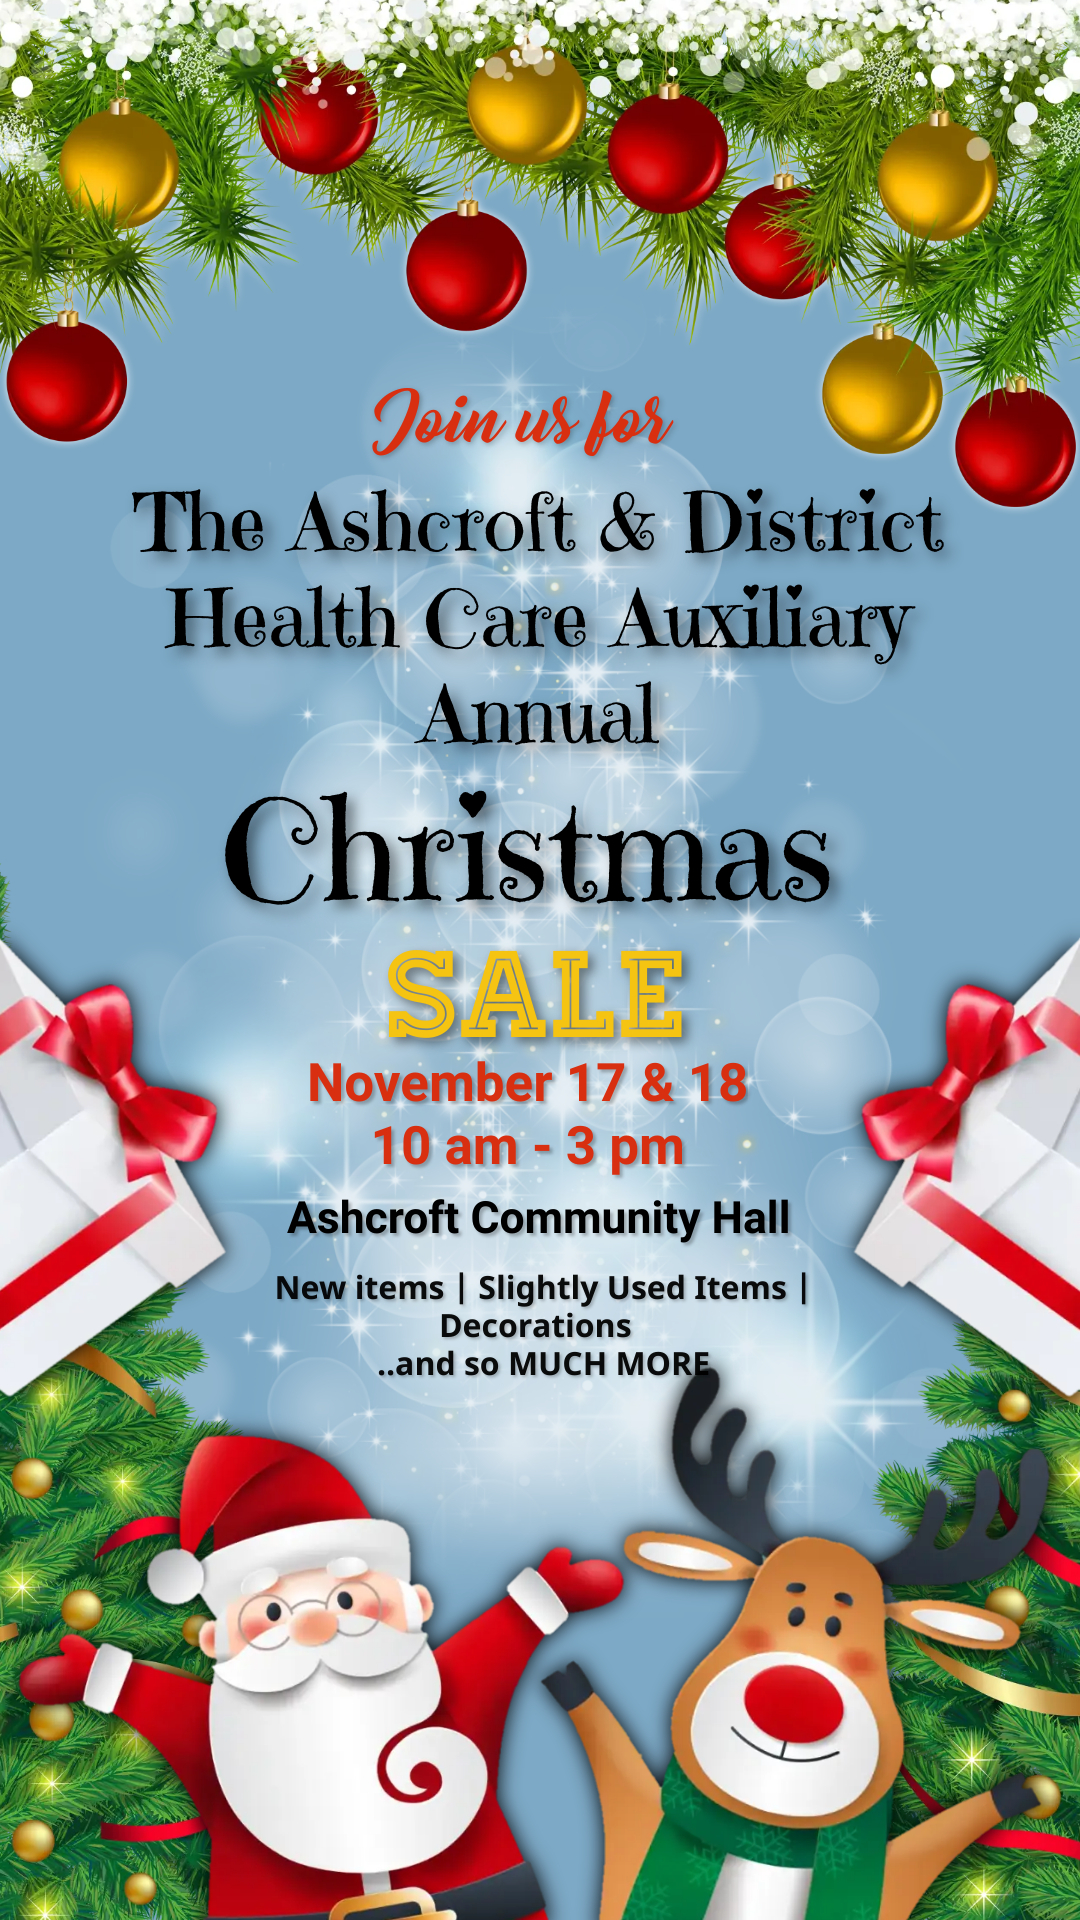 Ashcroft & District Health Care Auxiliary Annual Christmas Sale